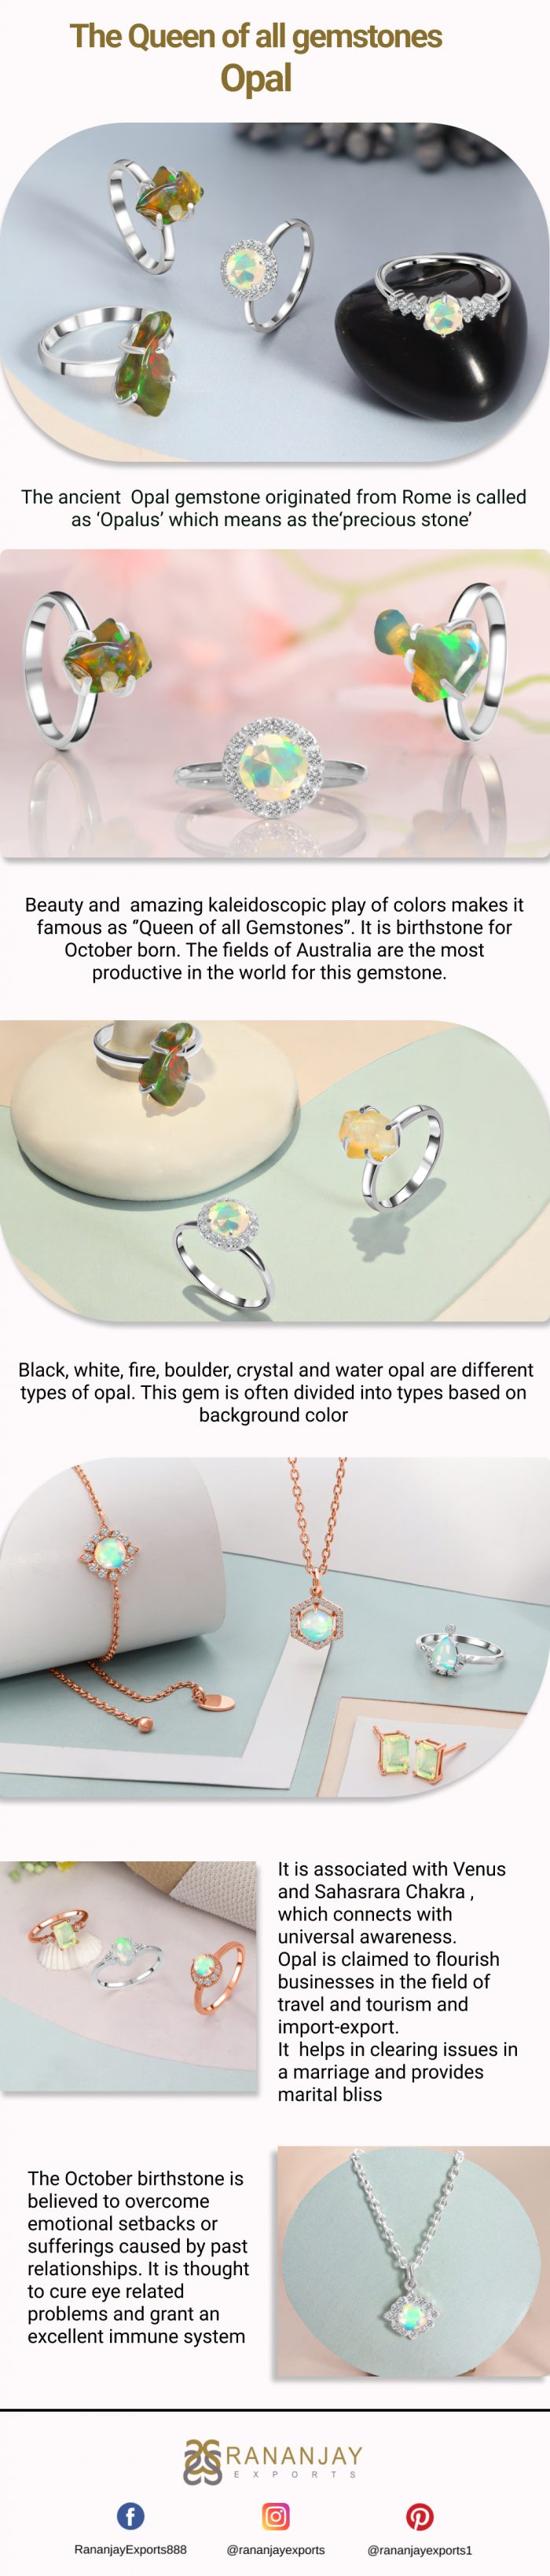 The Queen of all gemstones – Opal jewelry